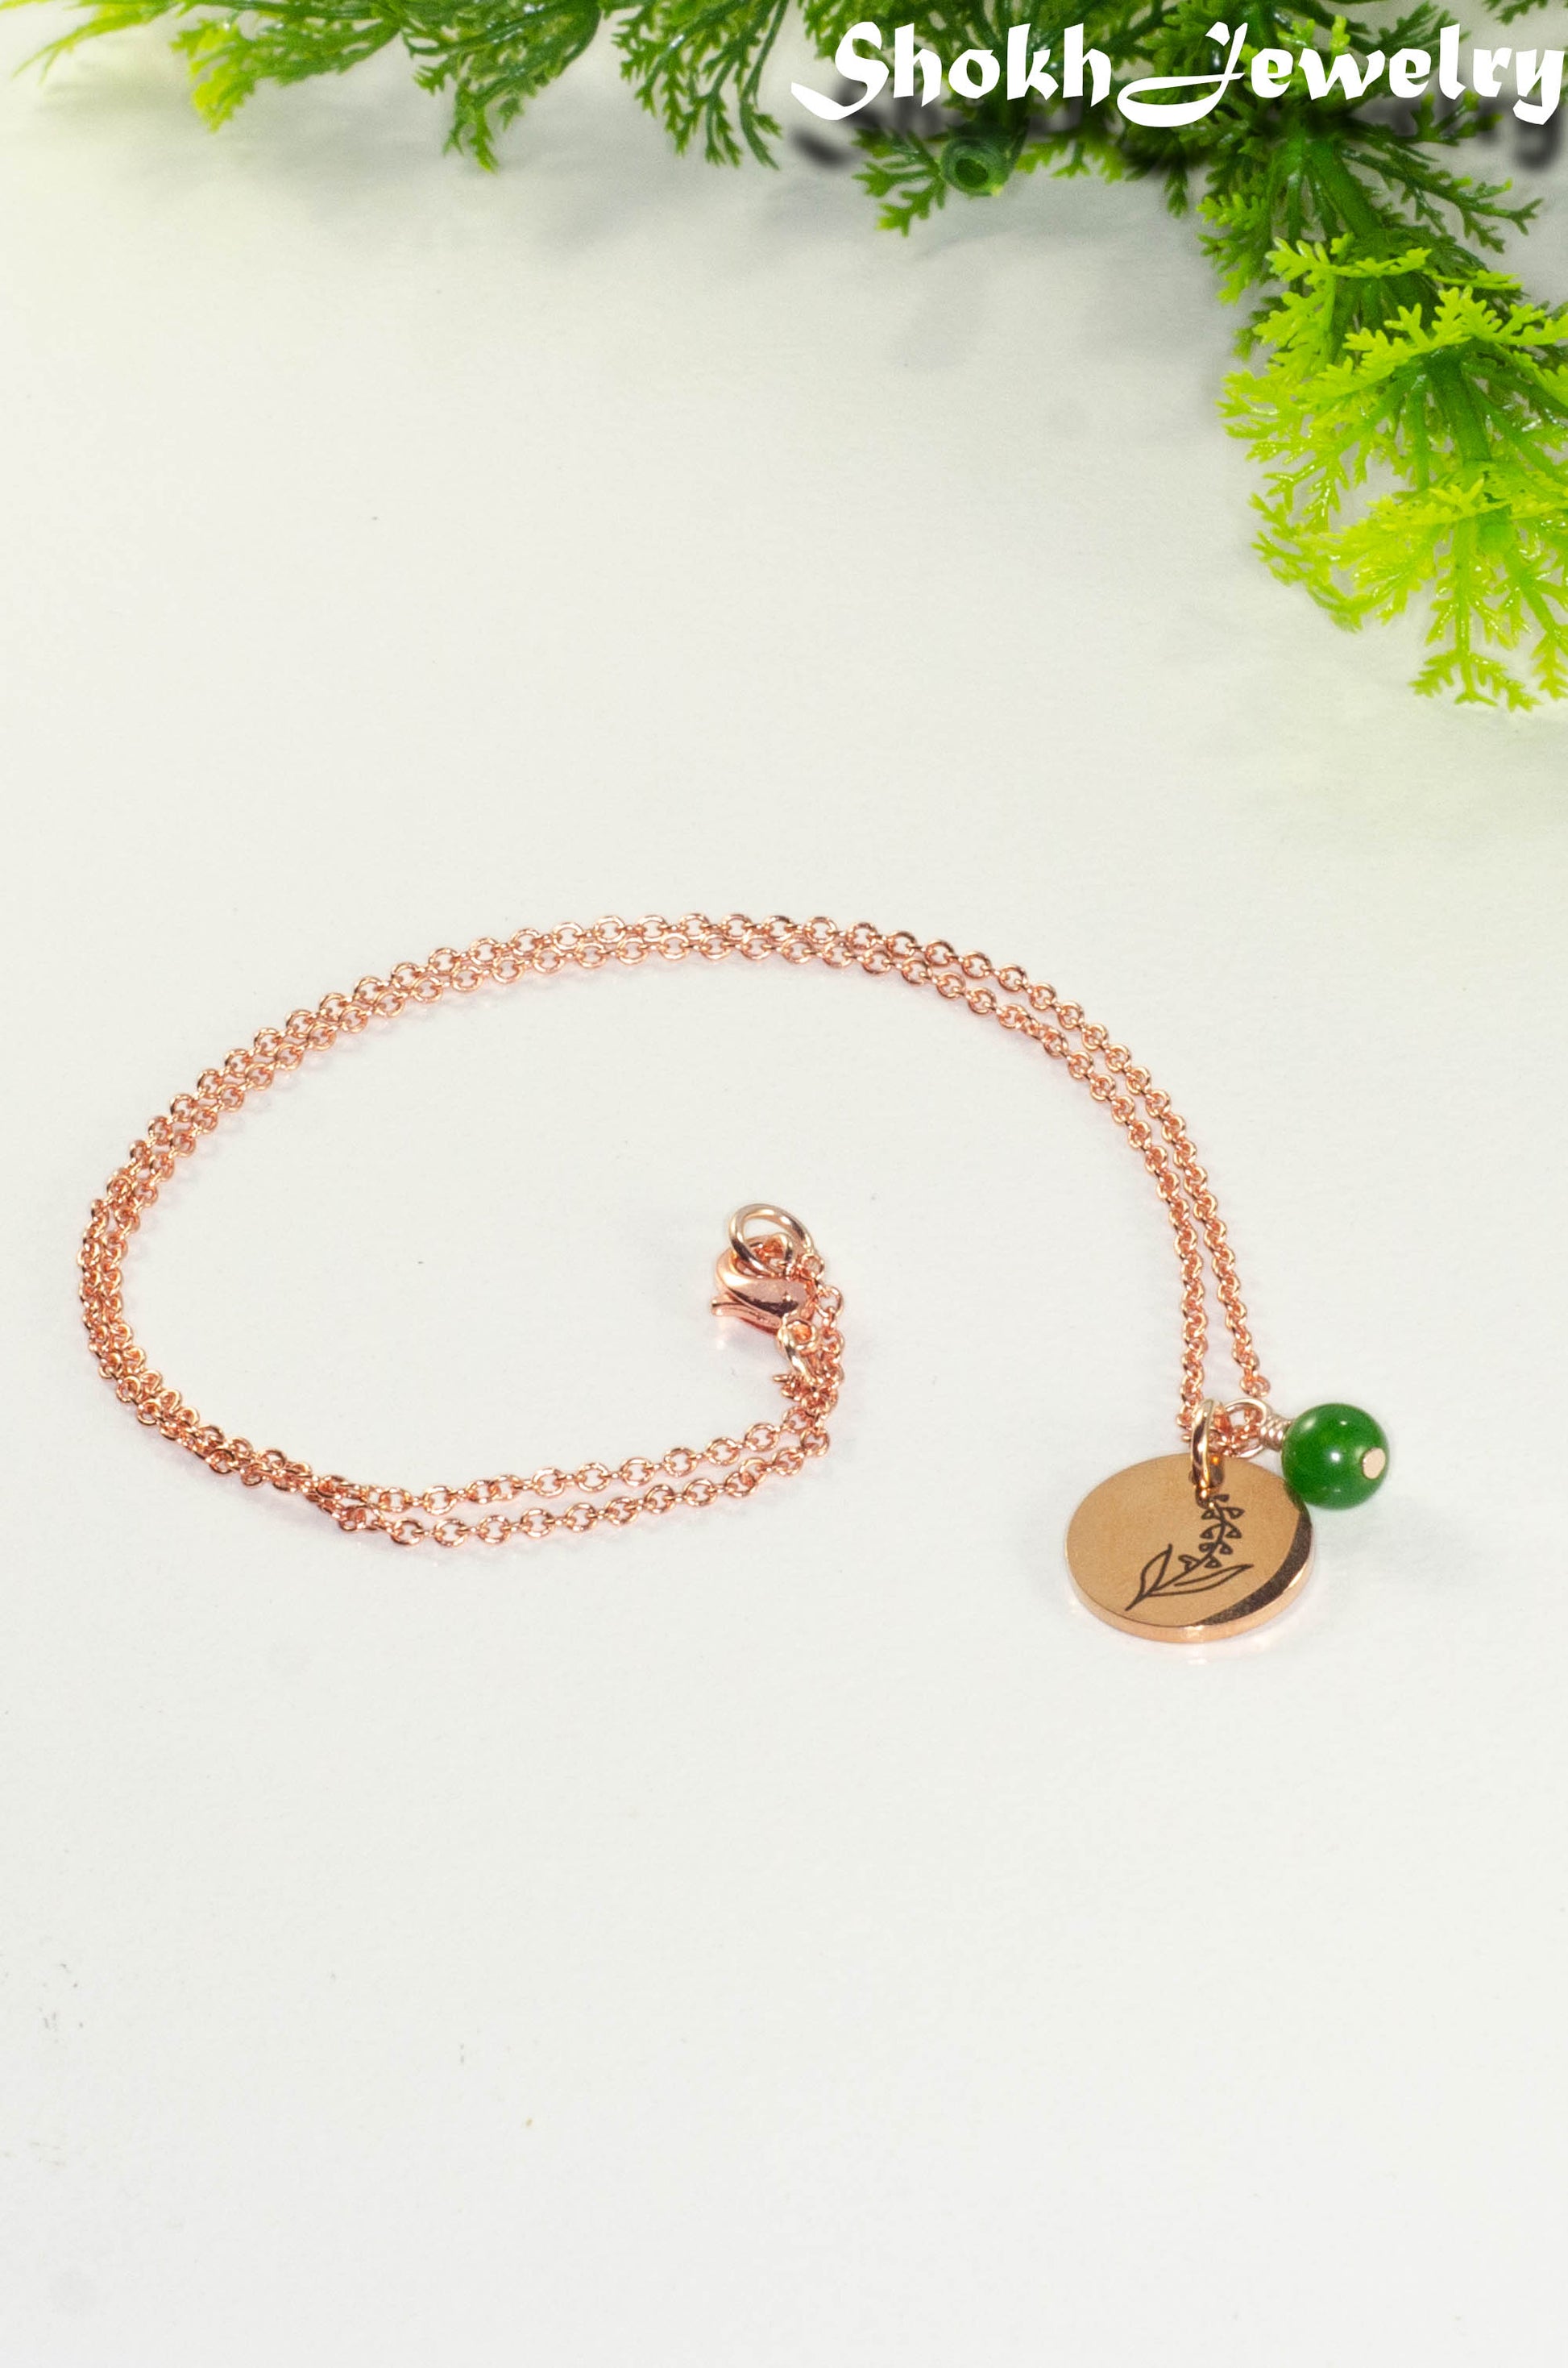 Rose Gold Plated May Birth Flower Necklace with Emerald Birthstone Pendant.